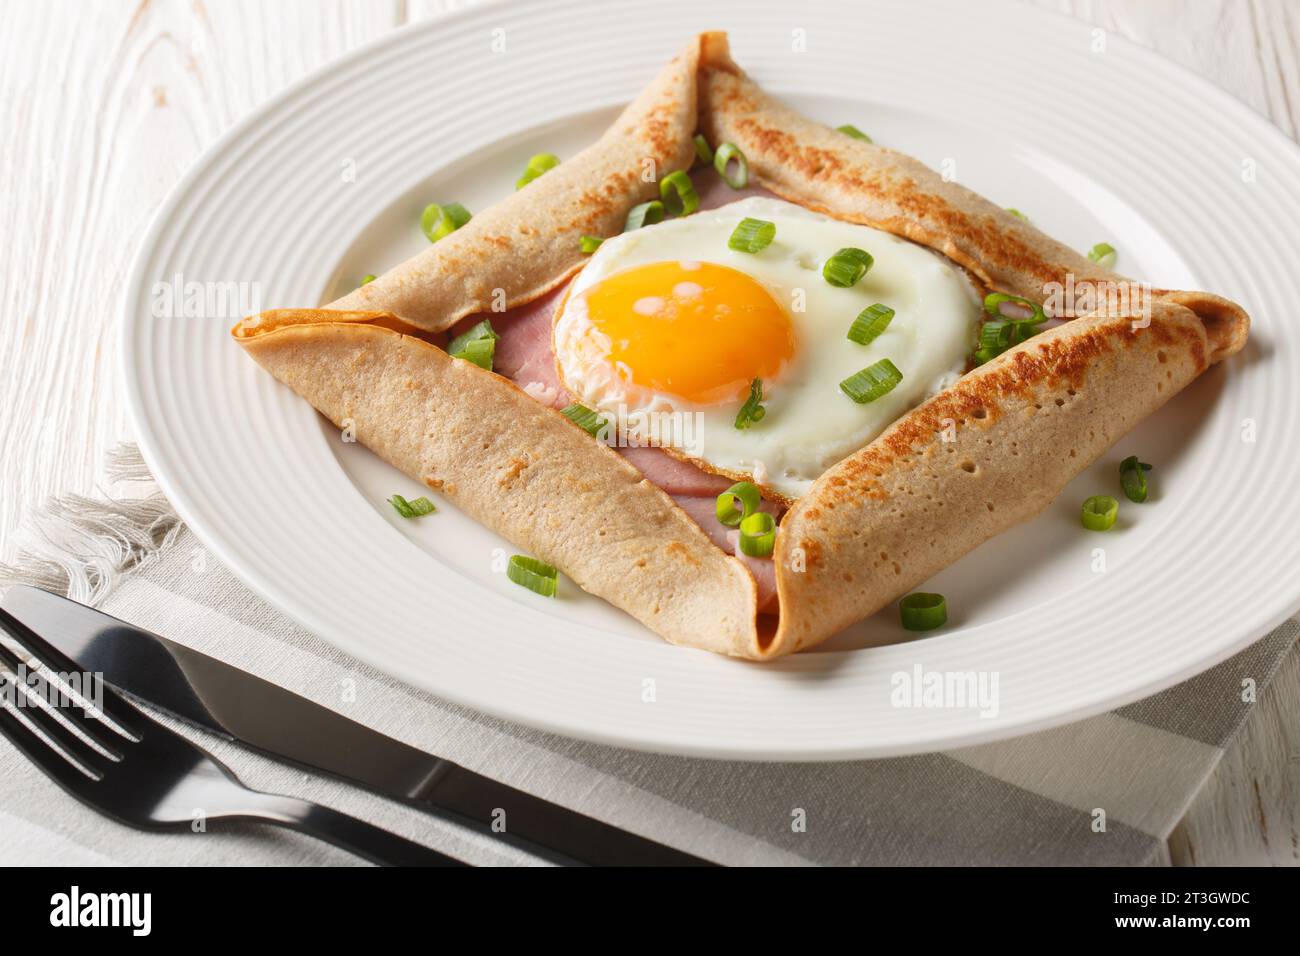 Breton galette, galette sarrasin, buckwheat crepe, with fried egg, cheese, ham closeup on the plate on the table. Horizontal Stock Photo